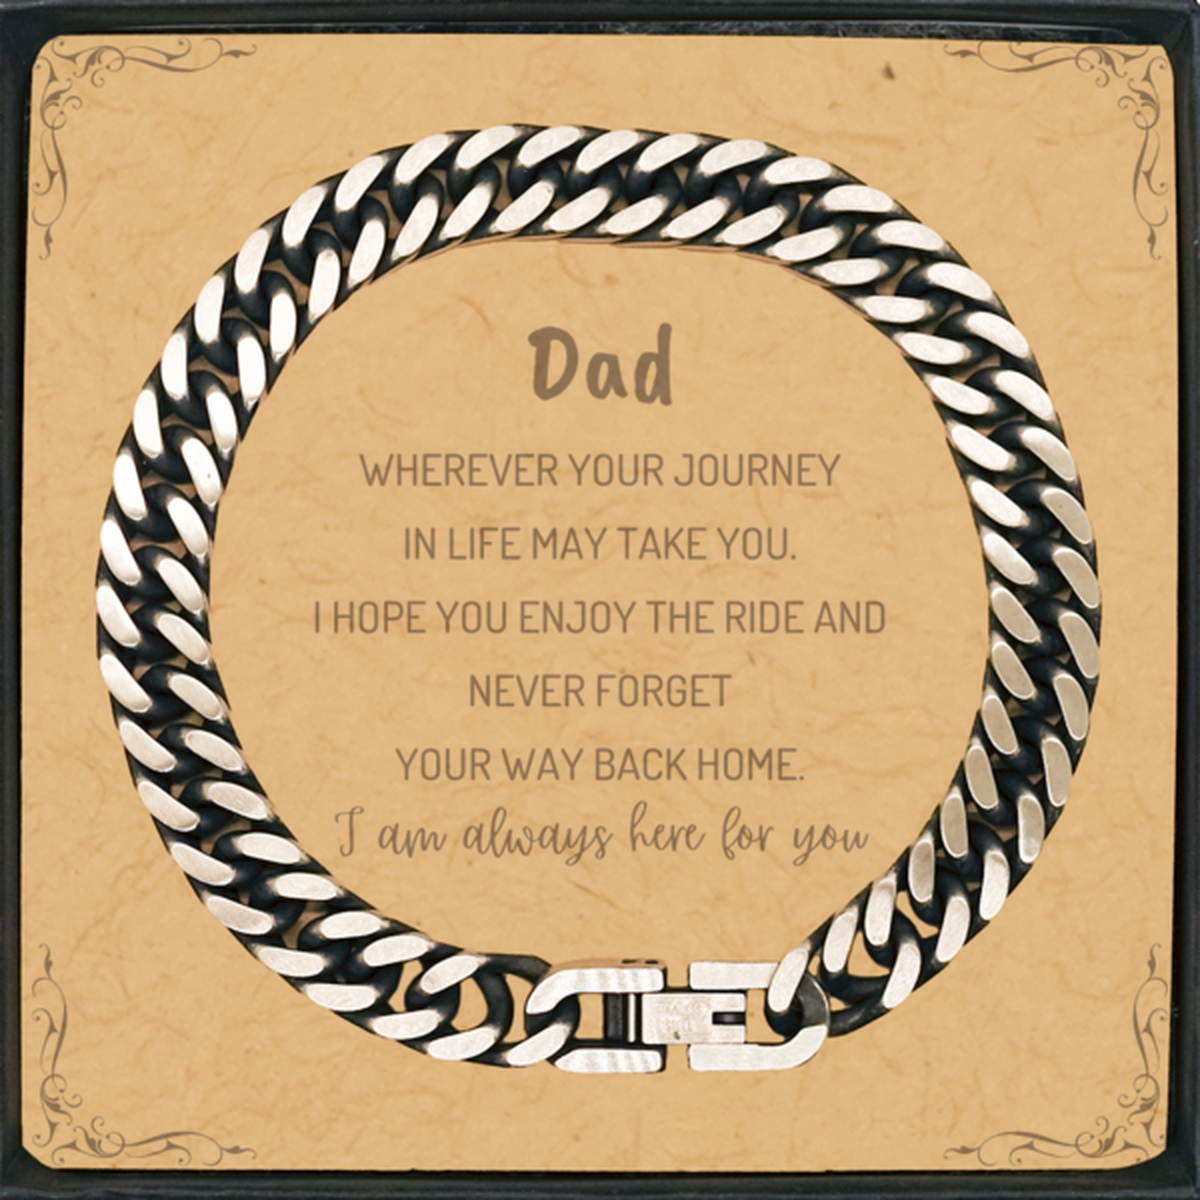 Dad wherever your journey in life may take you, I am always here for you Dad Cuban Link Chain Bracelet, Awesome Christmas Gifts For Dad Message Card, Dad Birthday Gifts for Men Women Family Loved One